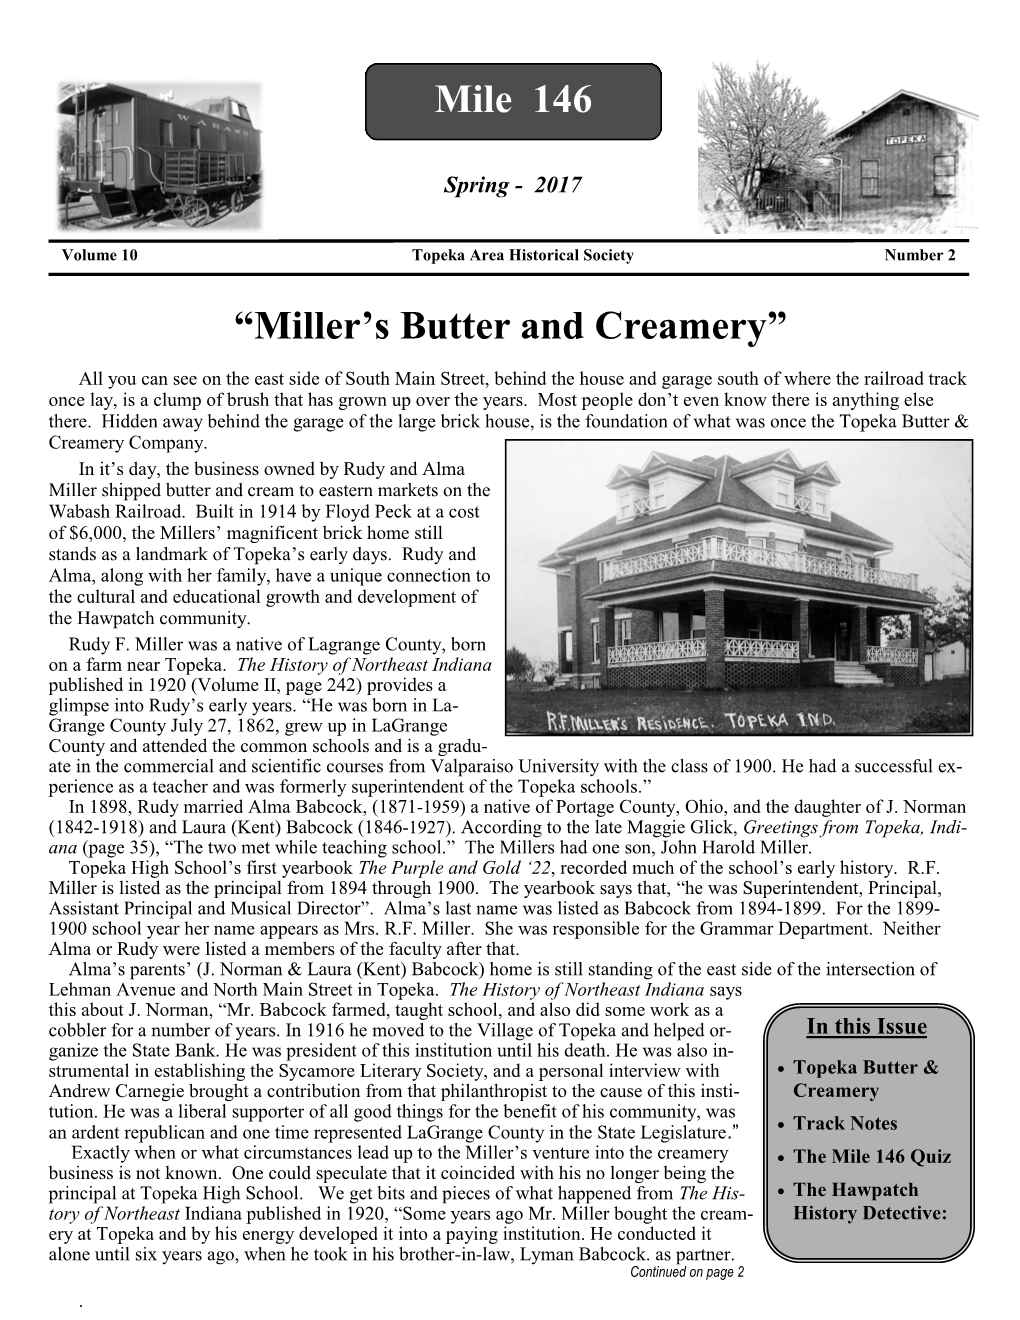 “Miller's Butter and Creamery” Mile